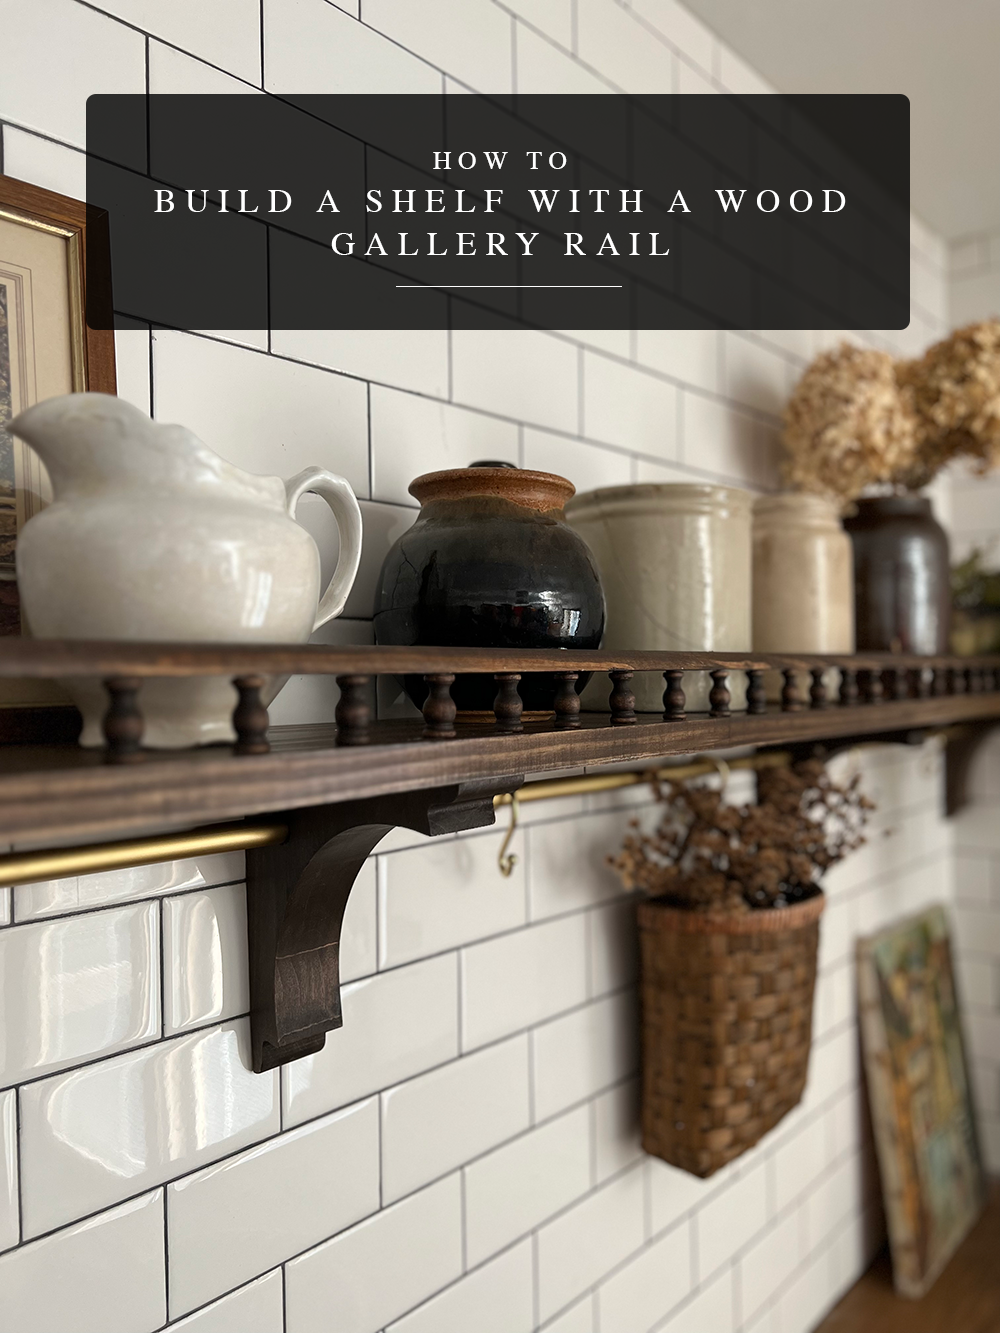 How to Build a Wood Gallery Rail Shelf